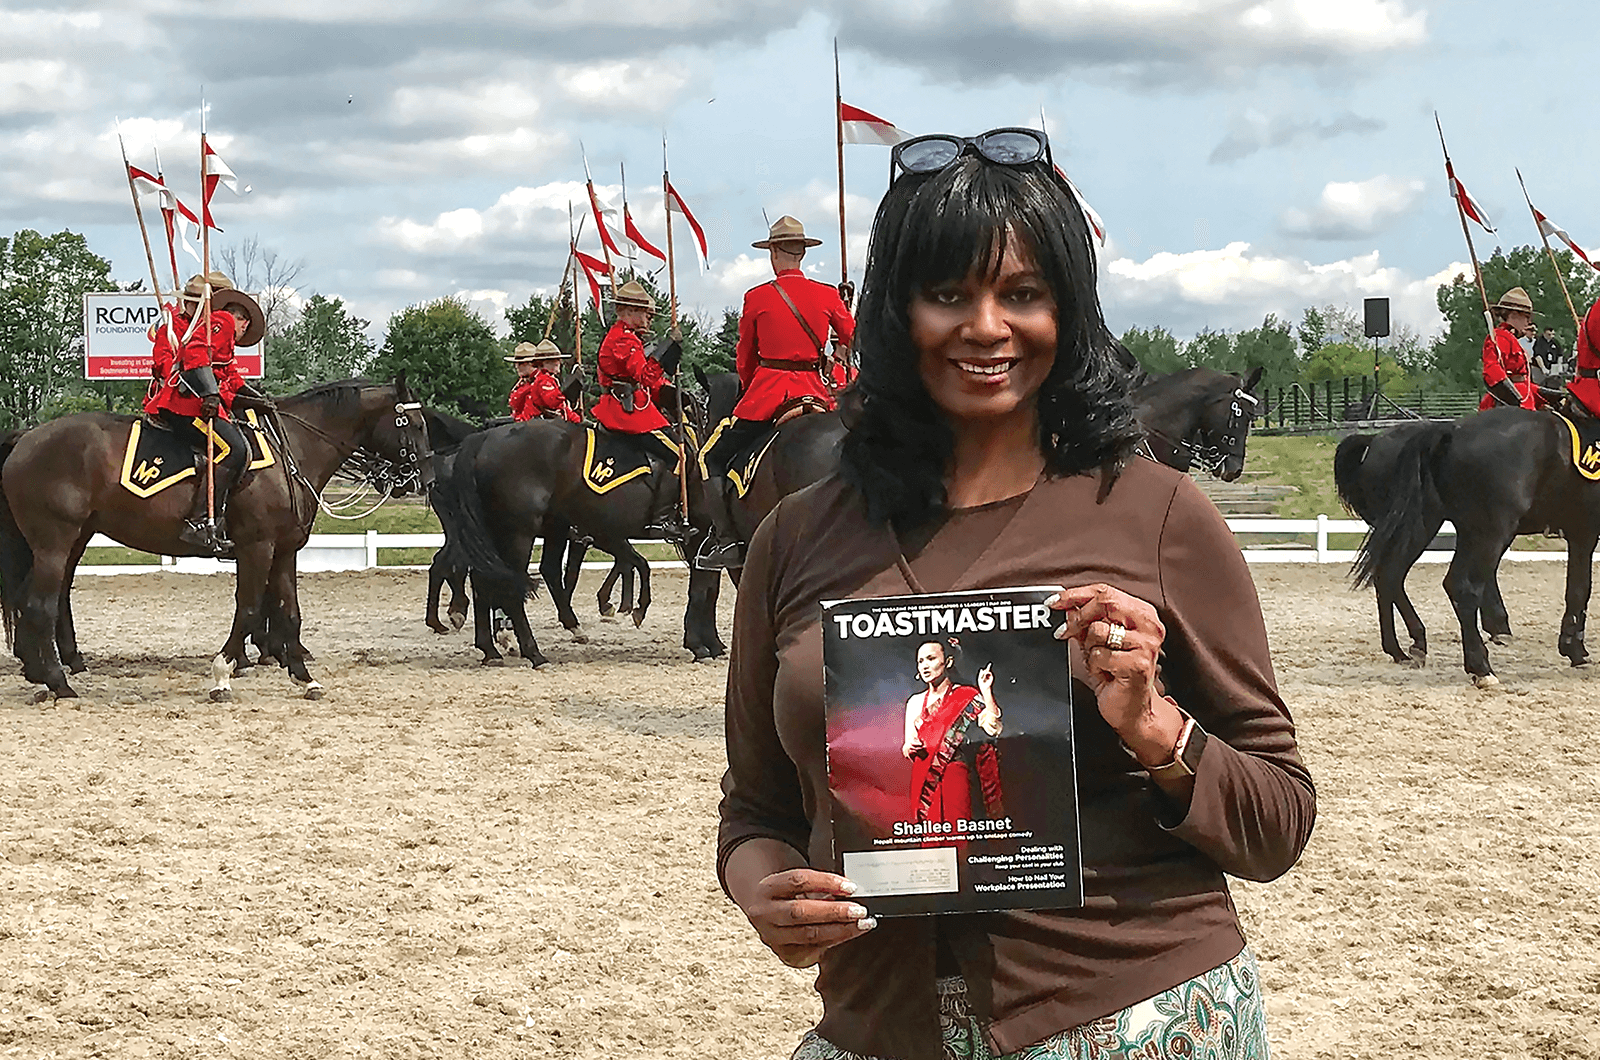 Sunny Fridge, ACB, ALB, of Jackson, Mississippi, enjoys a display by the Royal Canadian Mounted Police in Ottawa, Ontario, Canada.